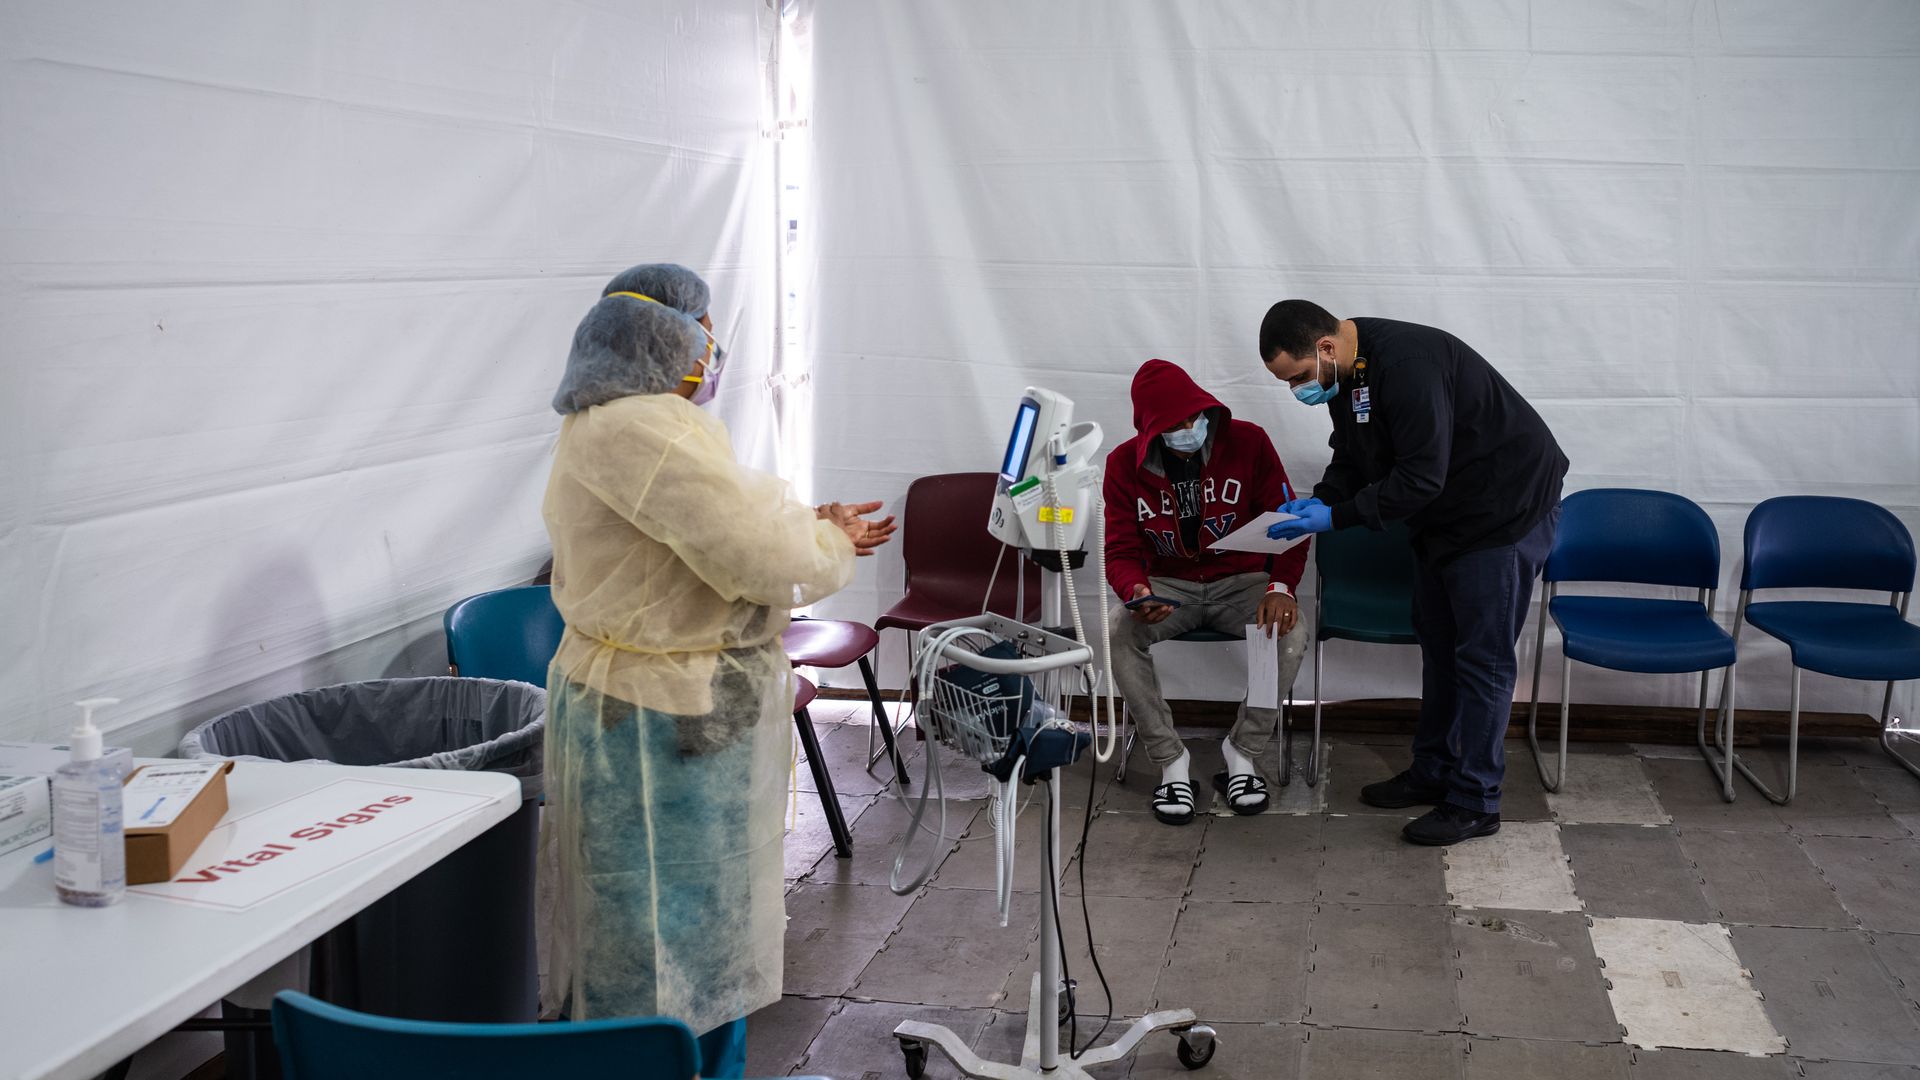 Clinicians prepare to test a patient for coronavirus inside a white tent.